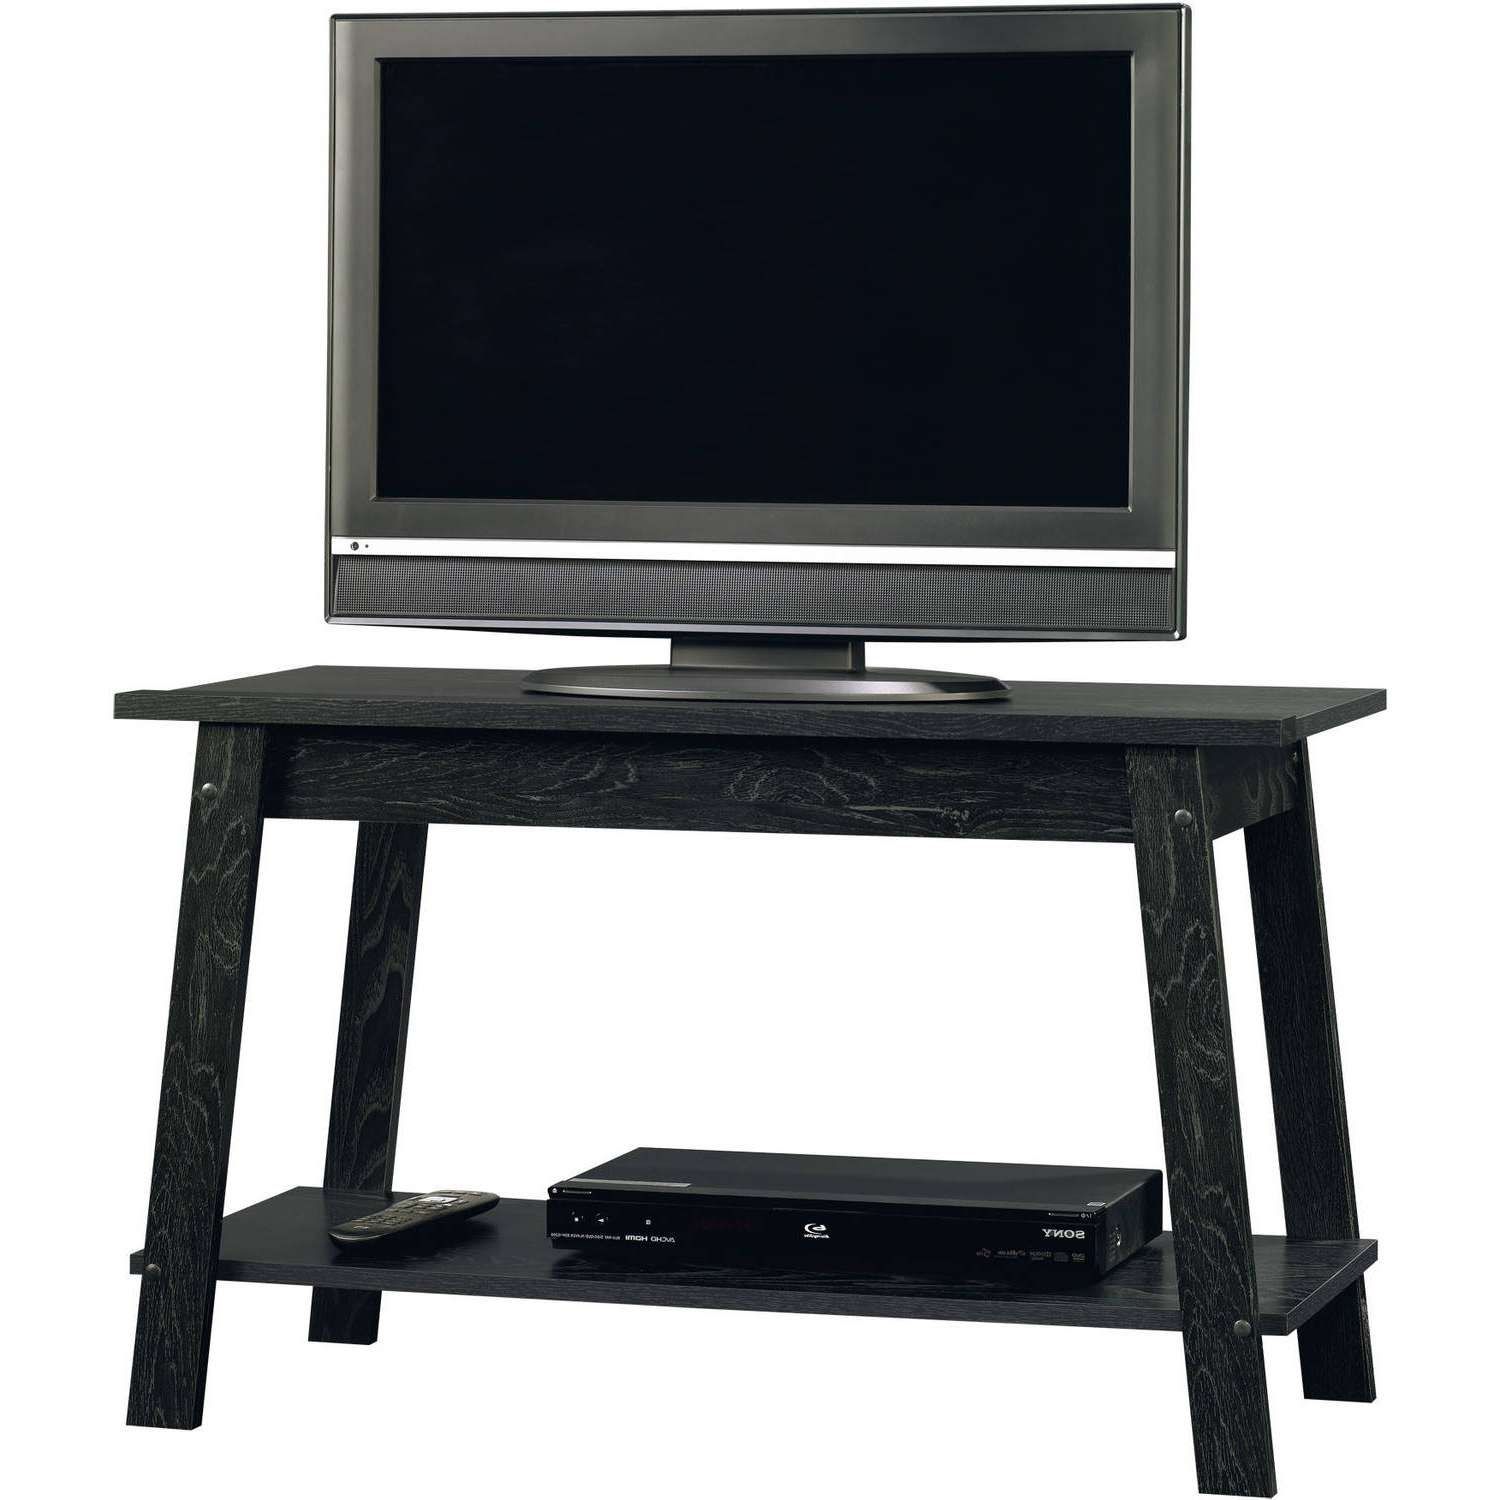 Breathtaking Black Tv Stand Next Day Delivery Jual Jf Small Throughout Small Black Tv Cabinets (View 11 of 20)